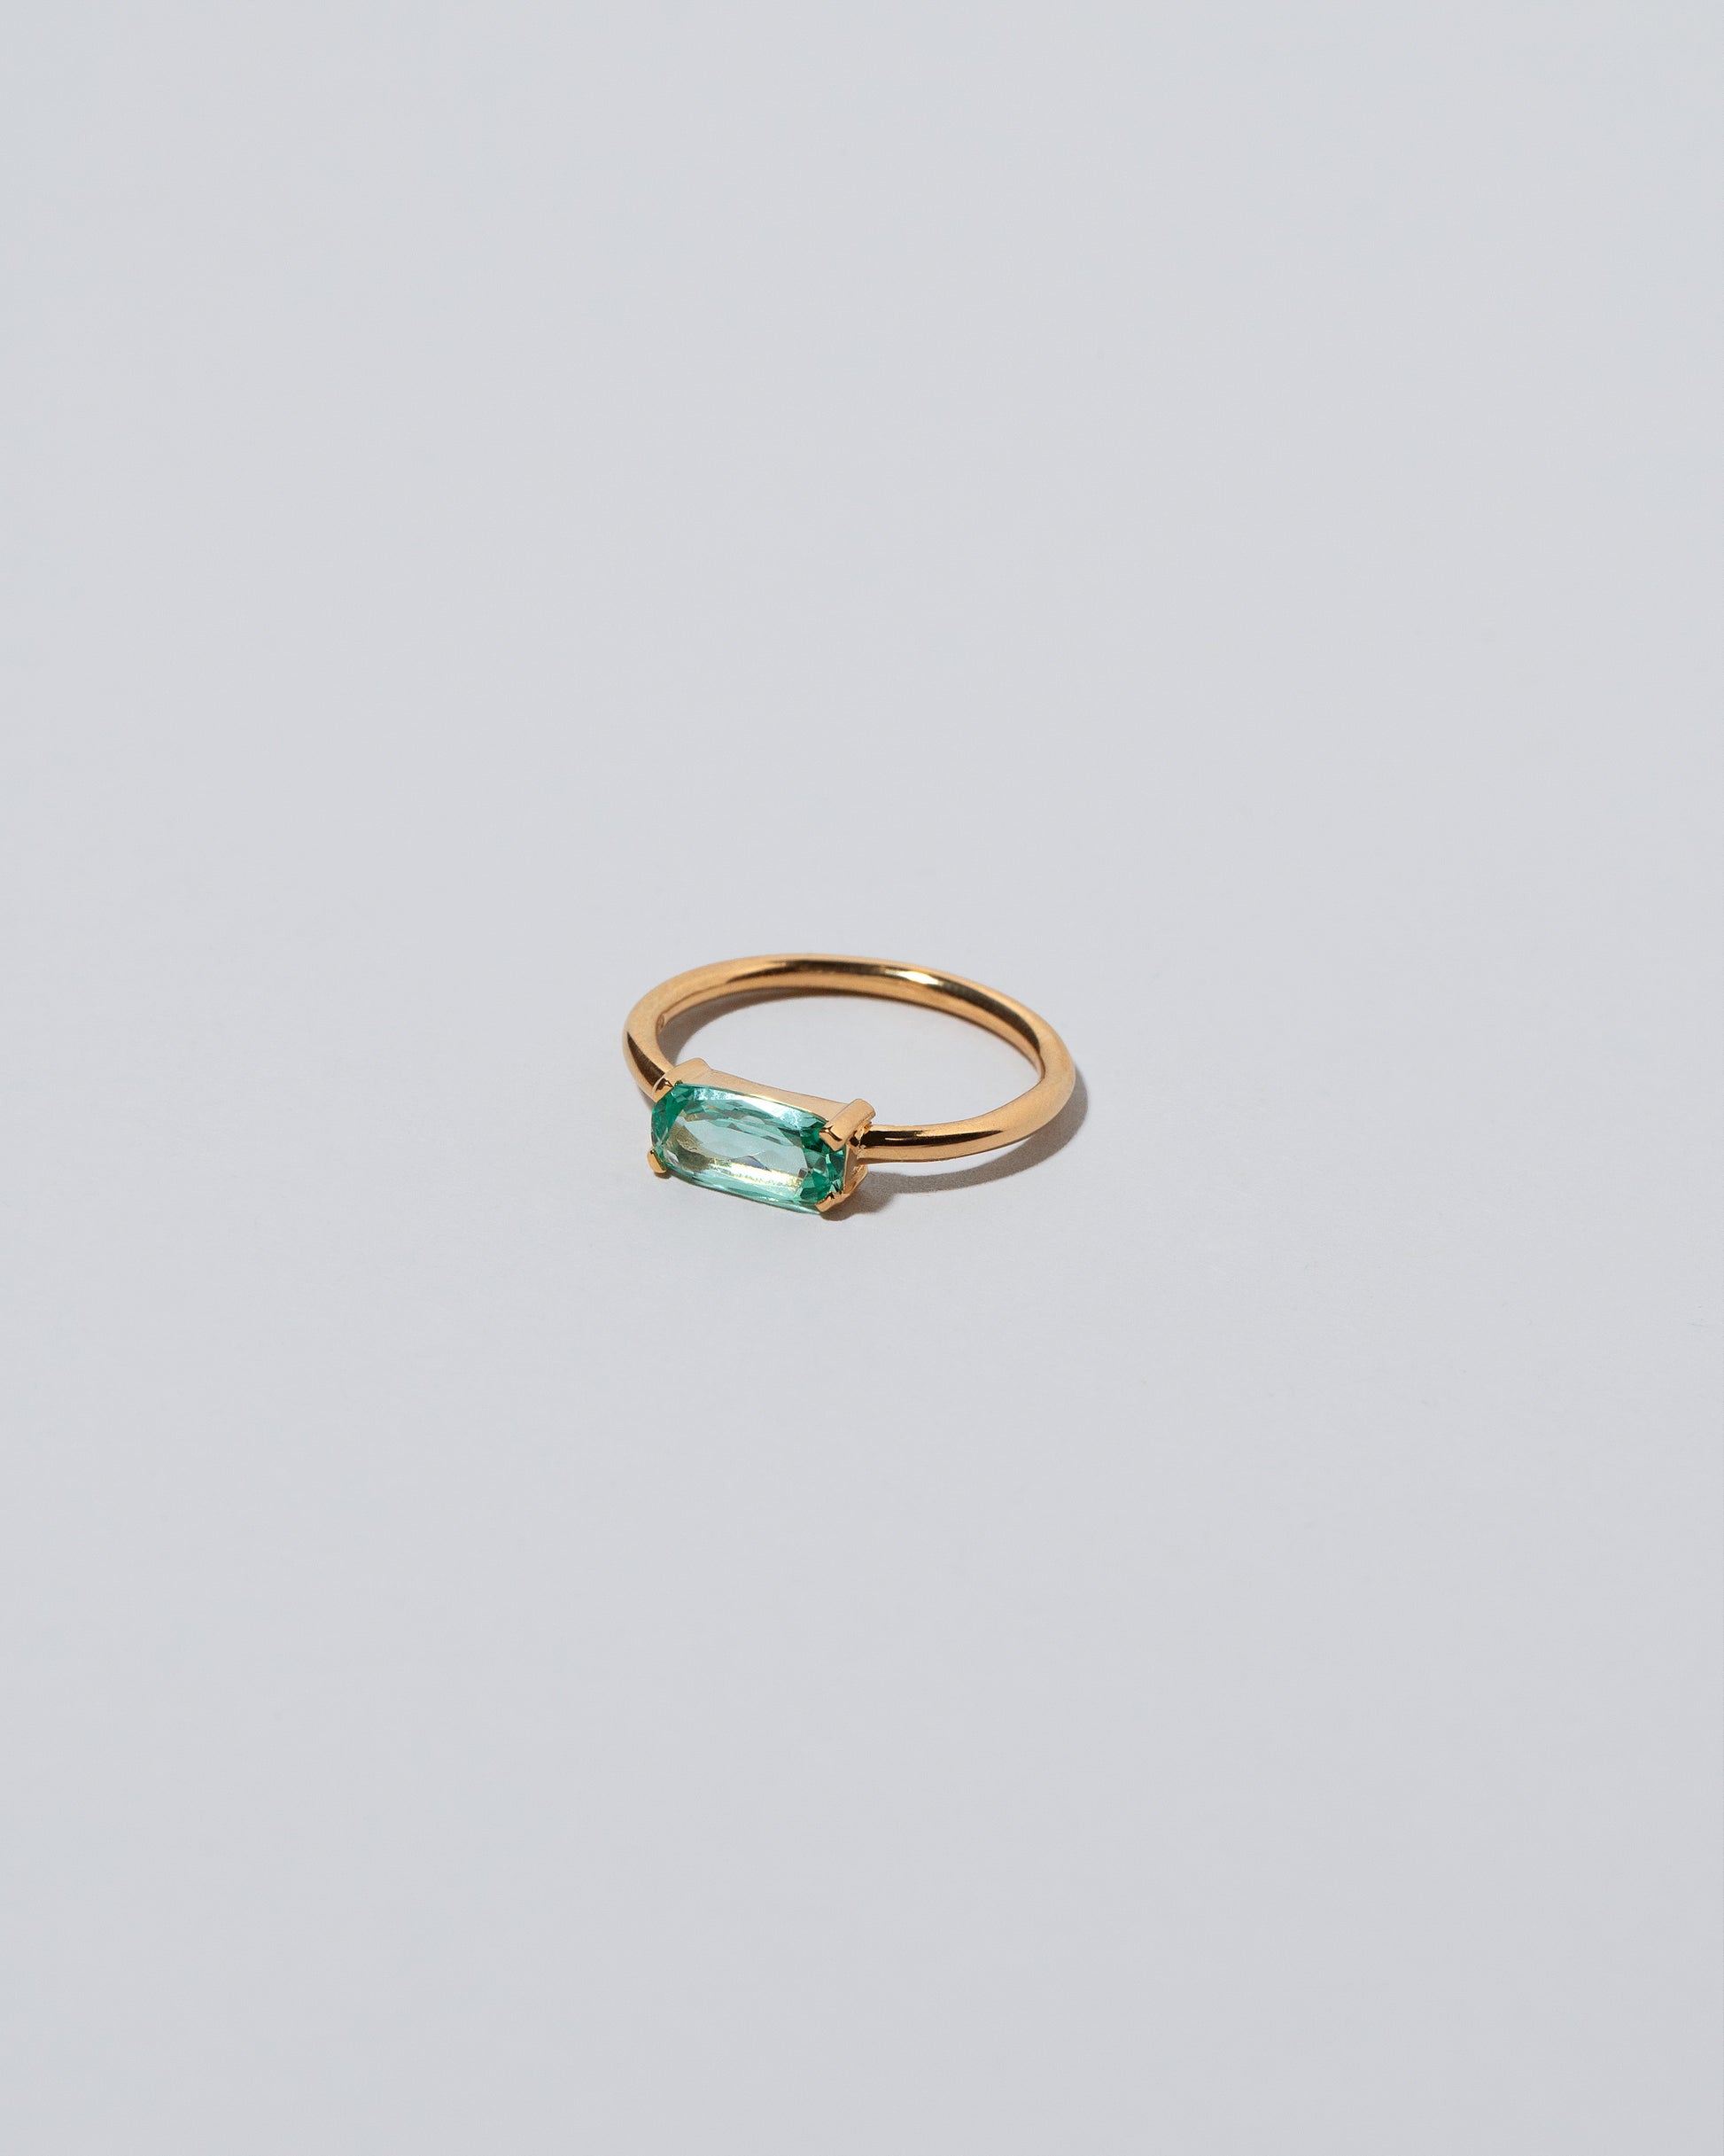 Green Adage Ring on light color background.